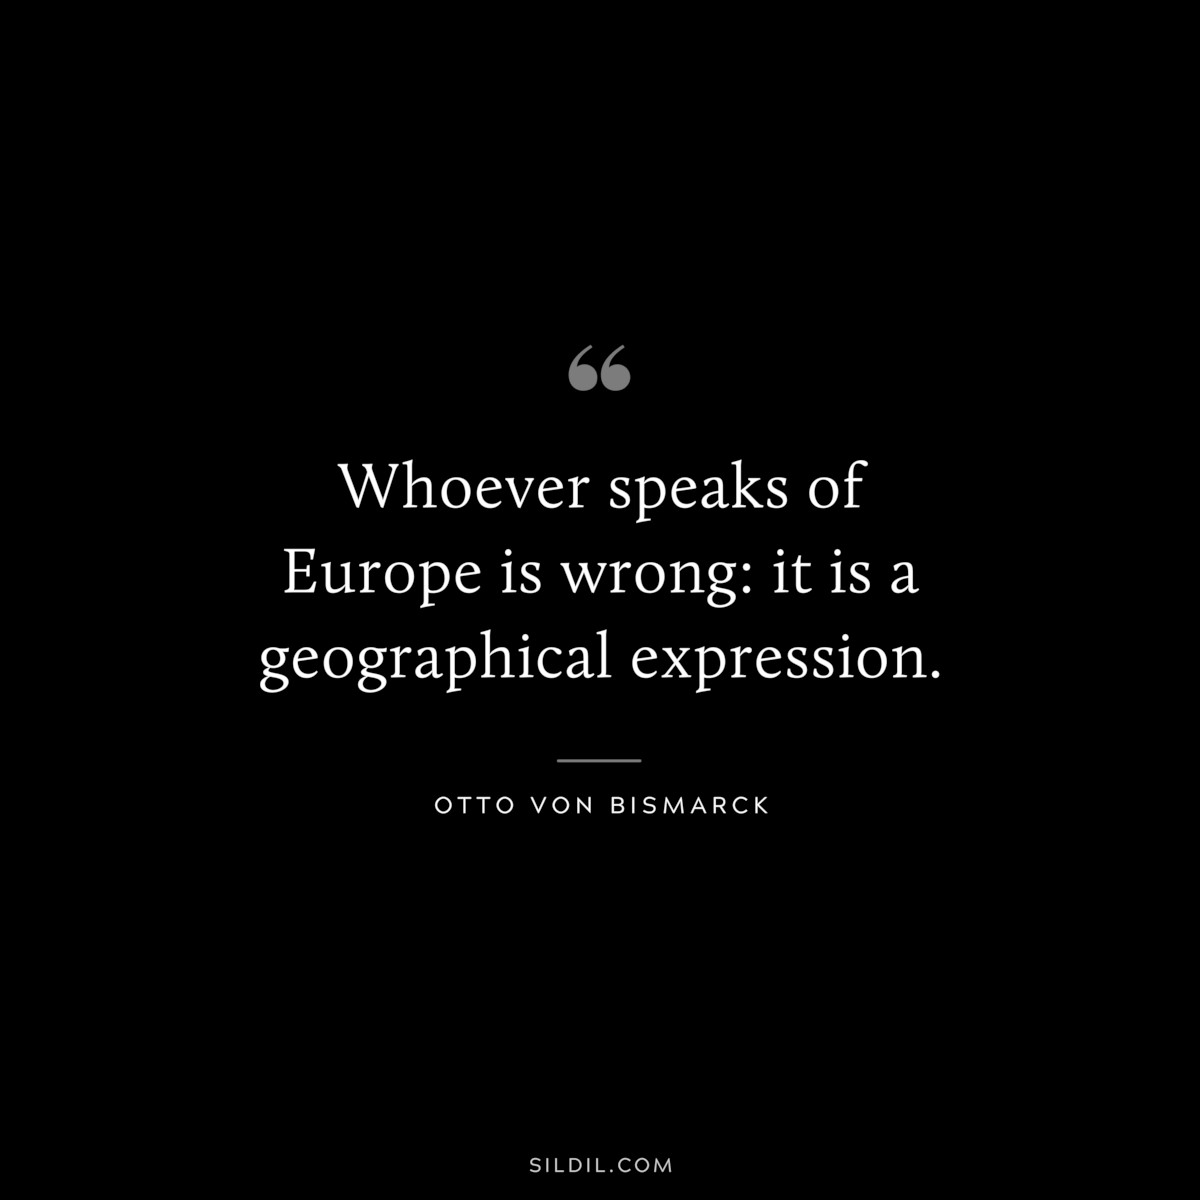 Whoever speaks of Europe is wrong: it is a geographical expression. ― Otto von Bismarck